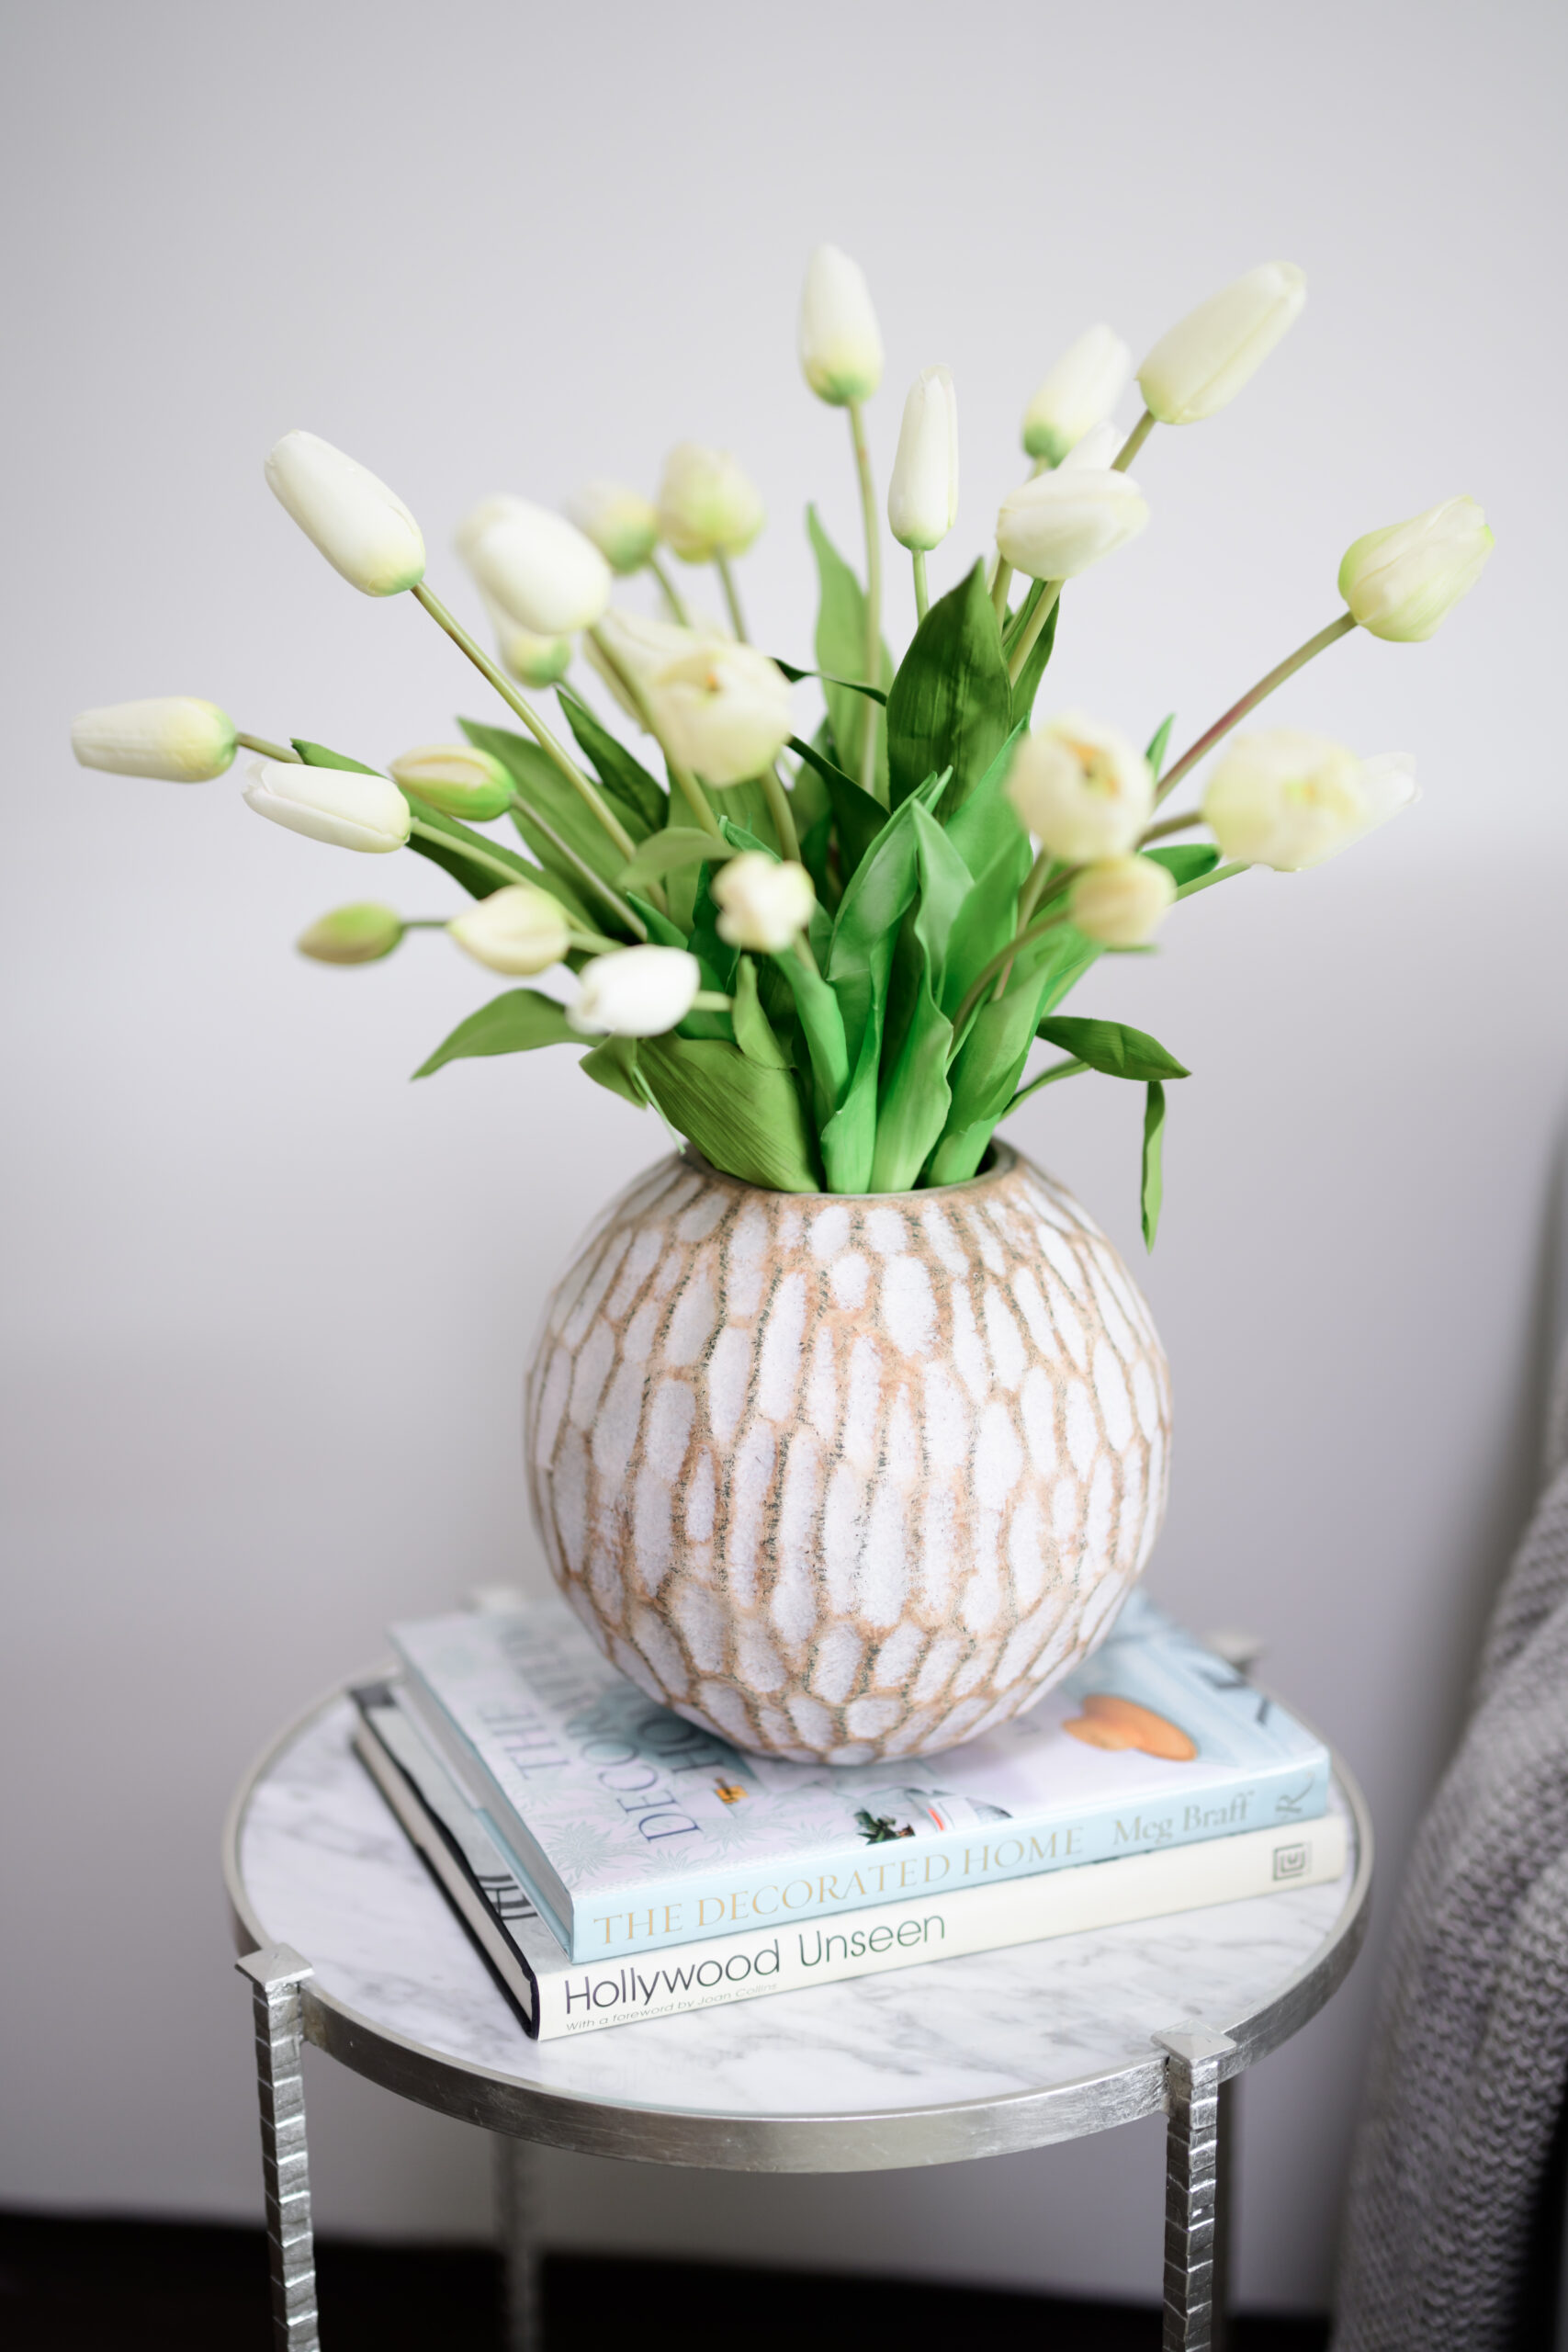 Photography Props that Speak to Your Brand 

#photography #props #audriedollins #admediagroup #admedia #contentsession #contentprops #amazonstorefront #flowers #homedecor #food #treats #coffeetablebook